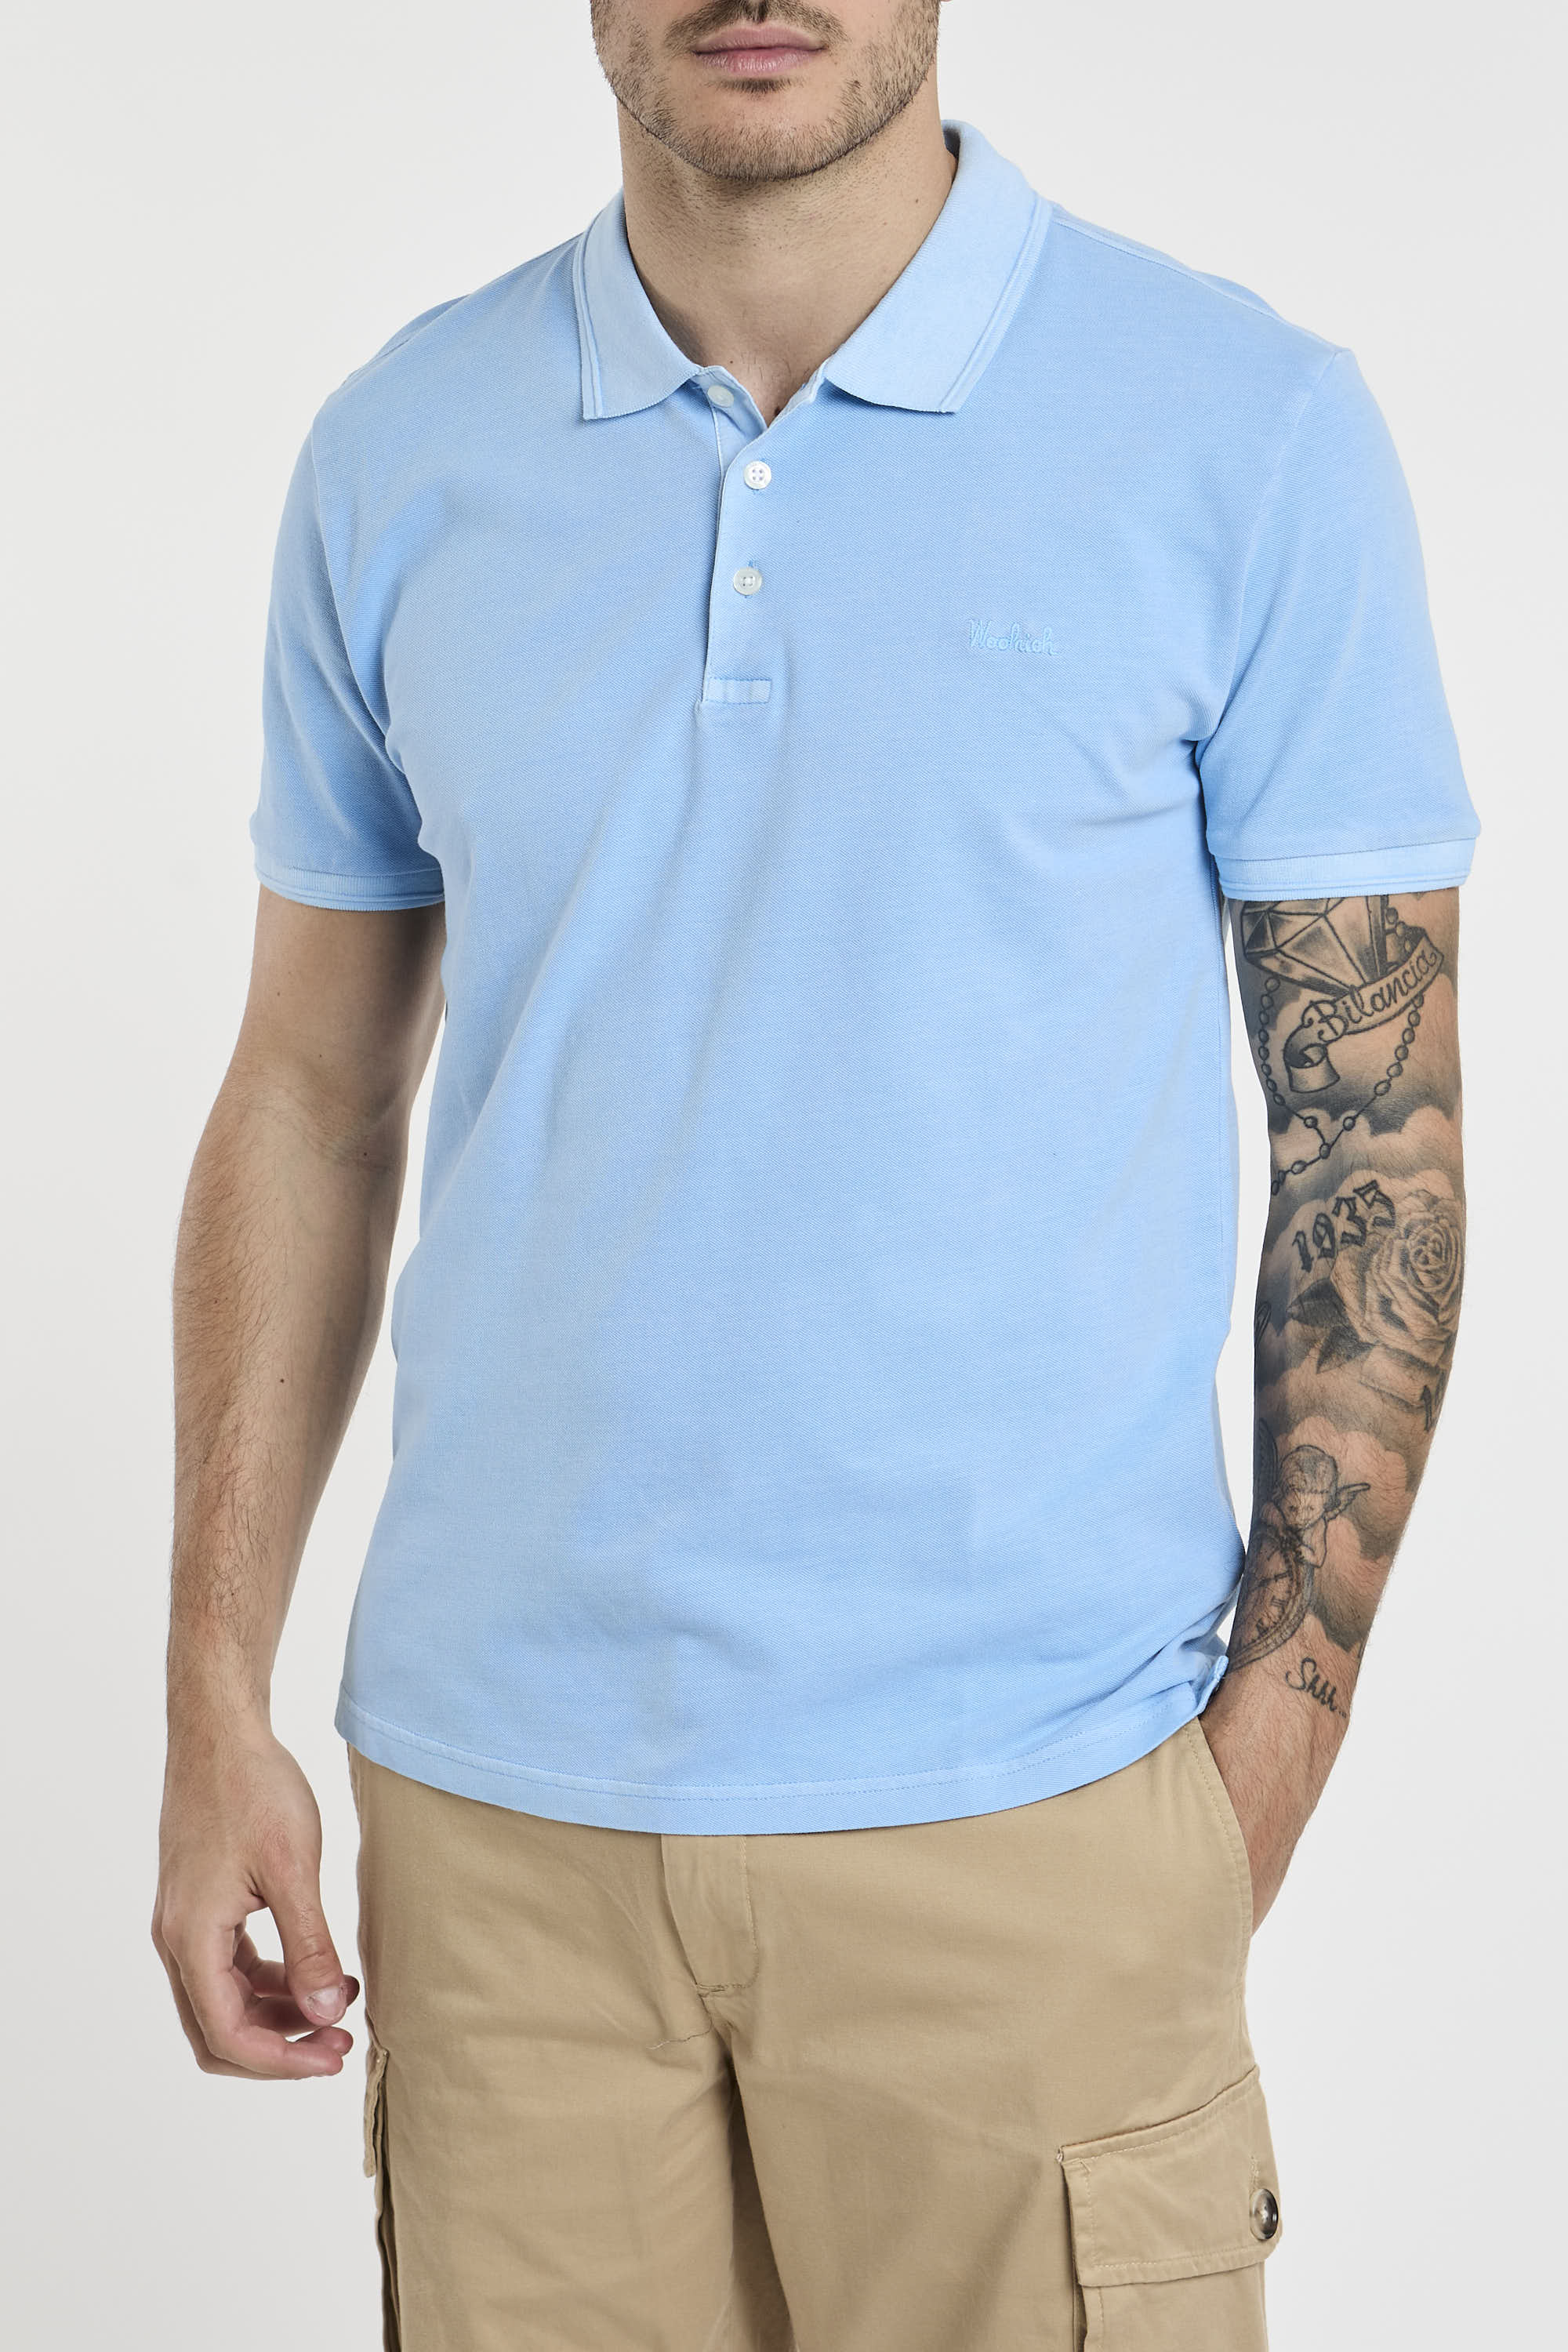 Woolrich Mackinack Piqué Stretch Cotton Polo in Light Blue-4